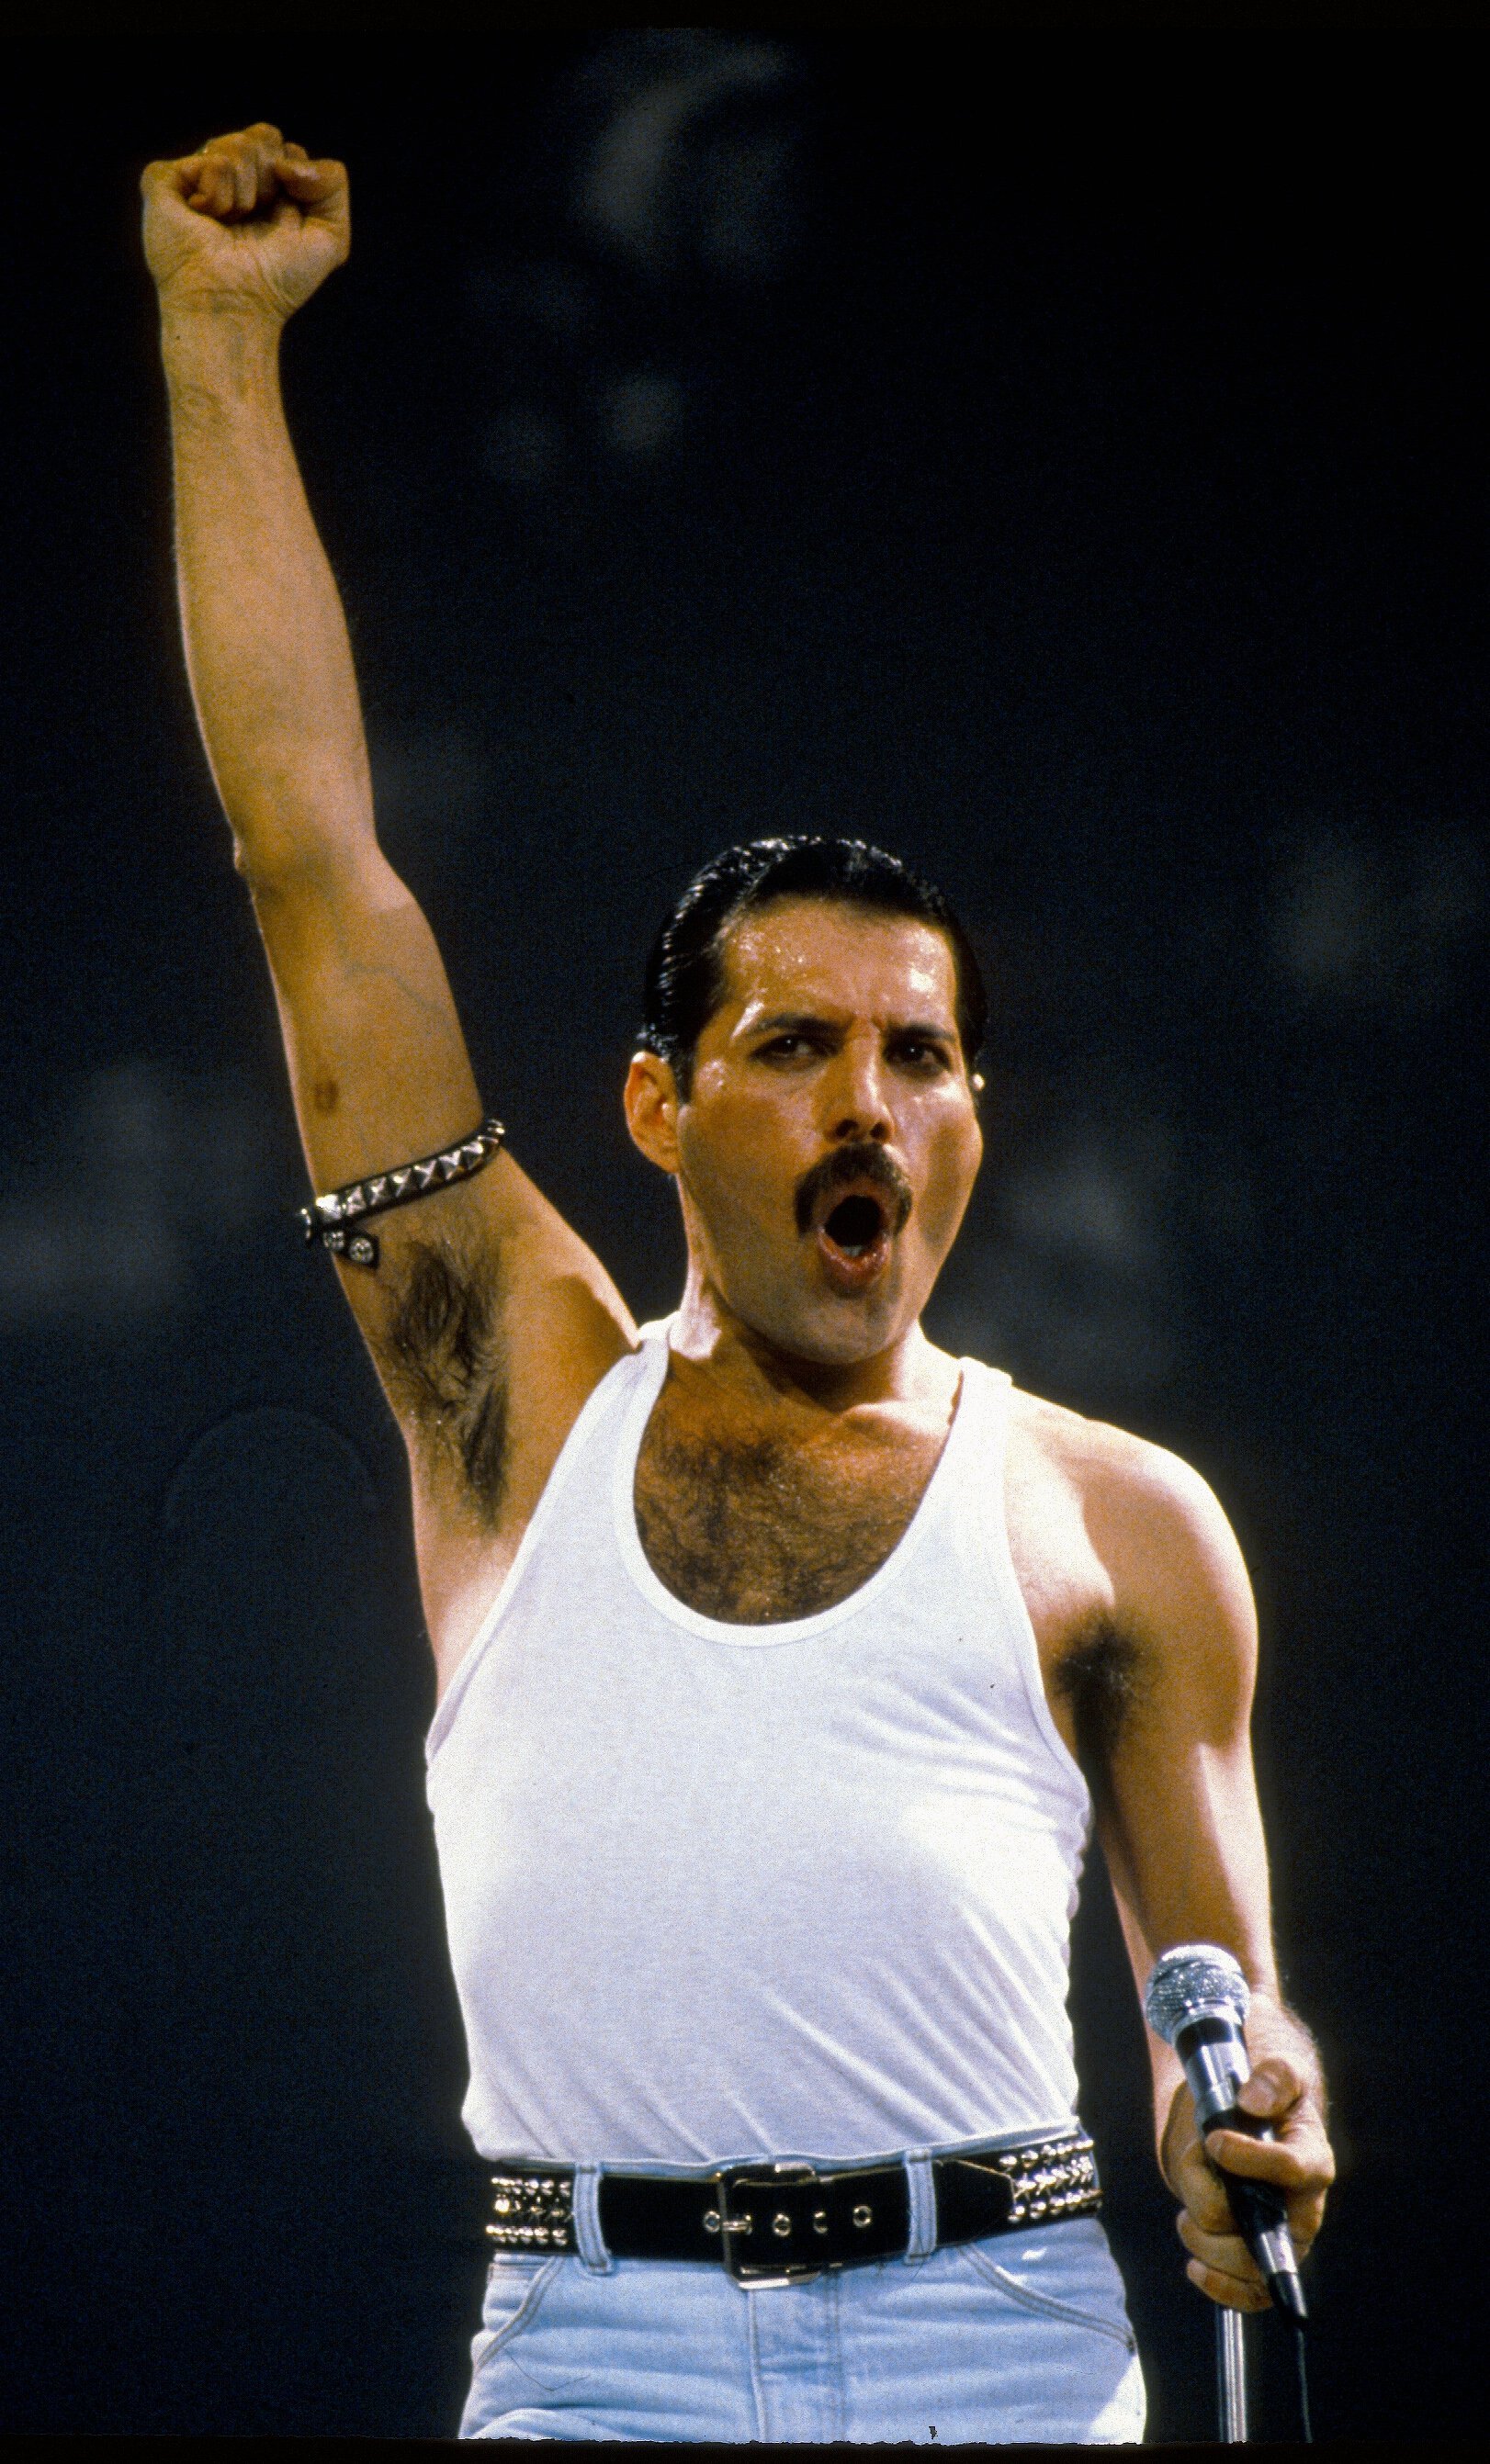 Freddie Mercury of the group Queen performs at the Live Aid concert on July 13, 1985 in London, England | Photo: GettyImages